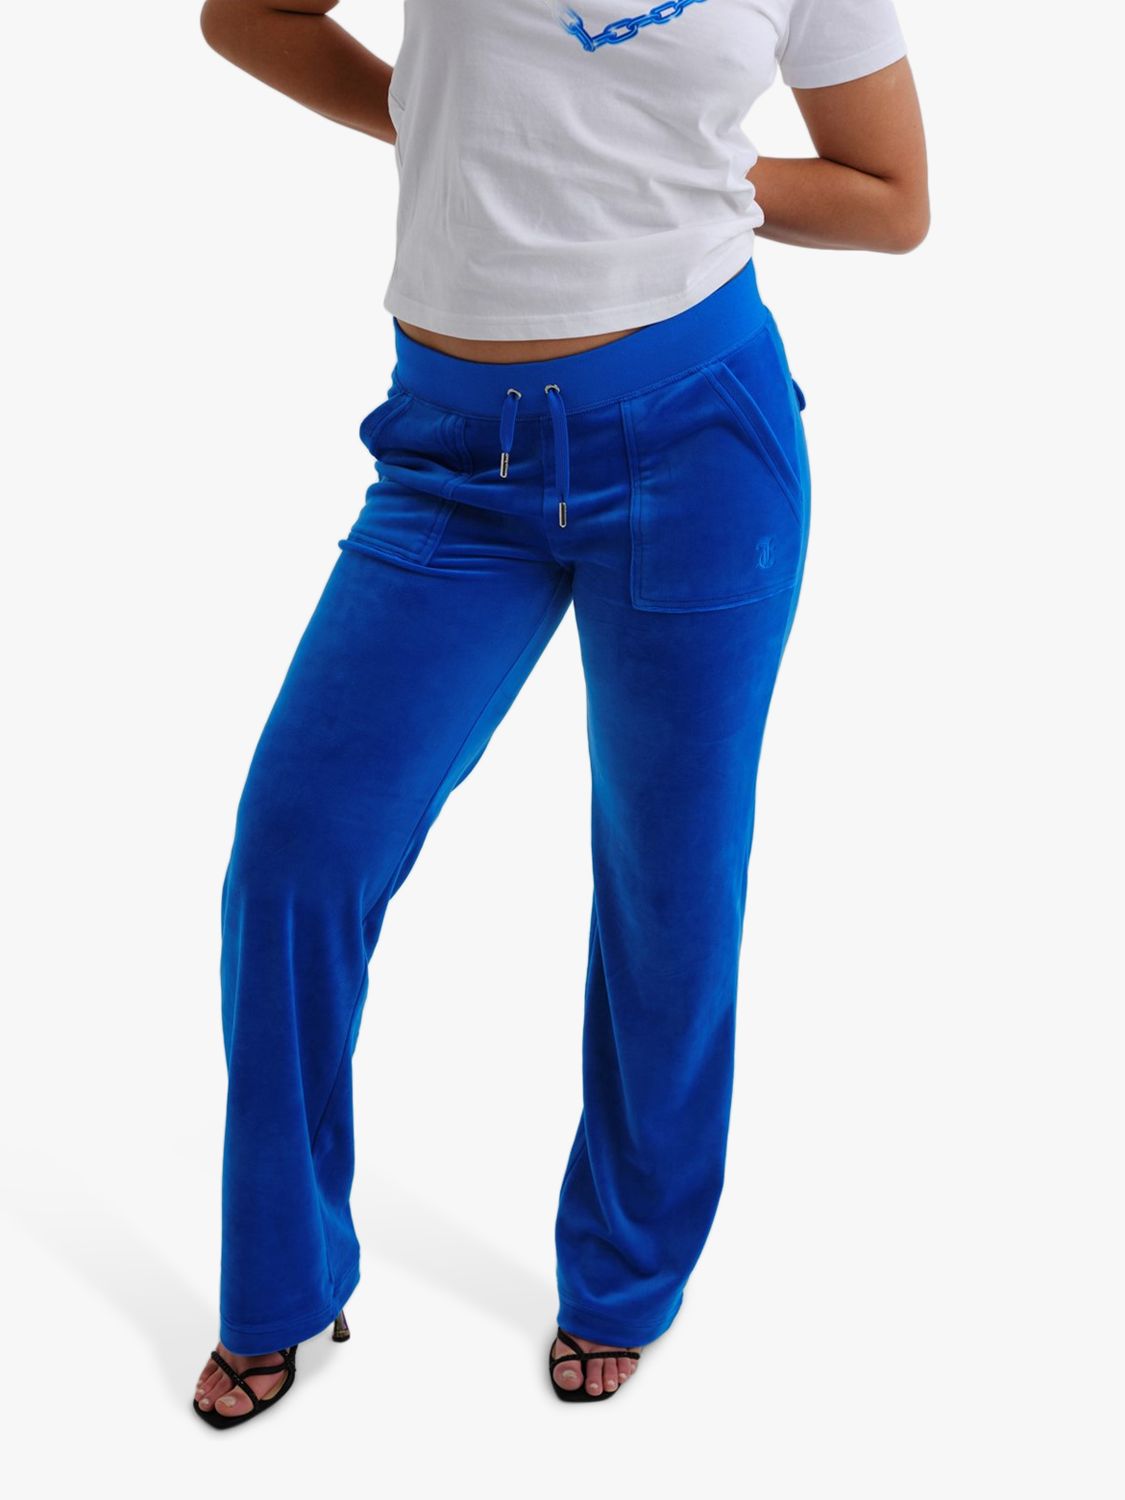 Juicy Couture Del Ray Tracksuit Bottoms, Skydive, XS